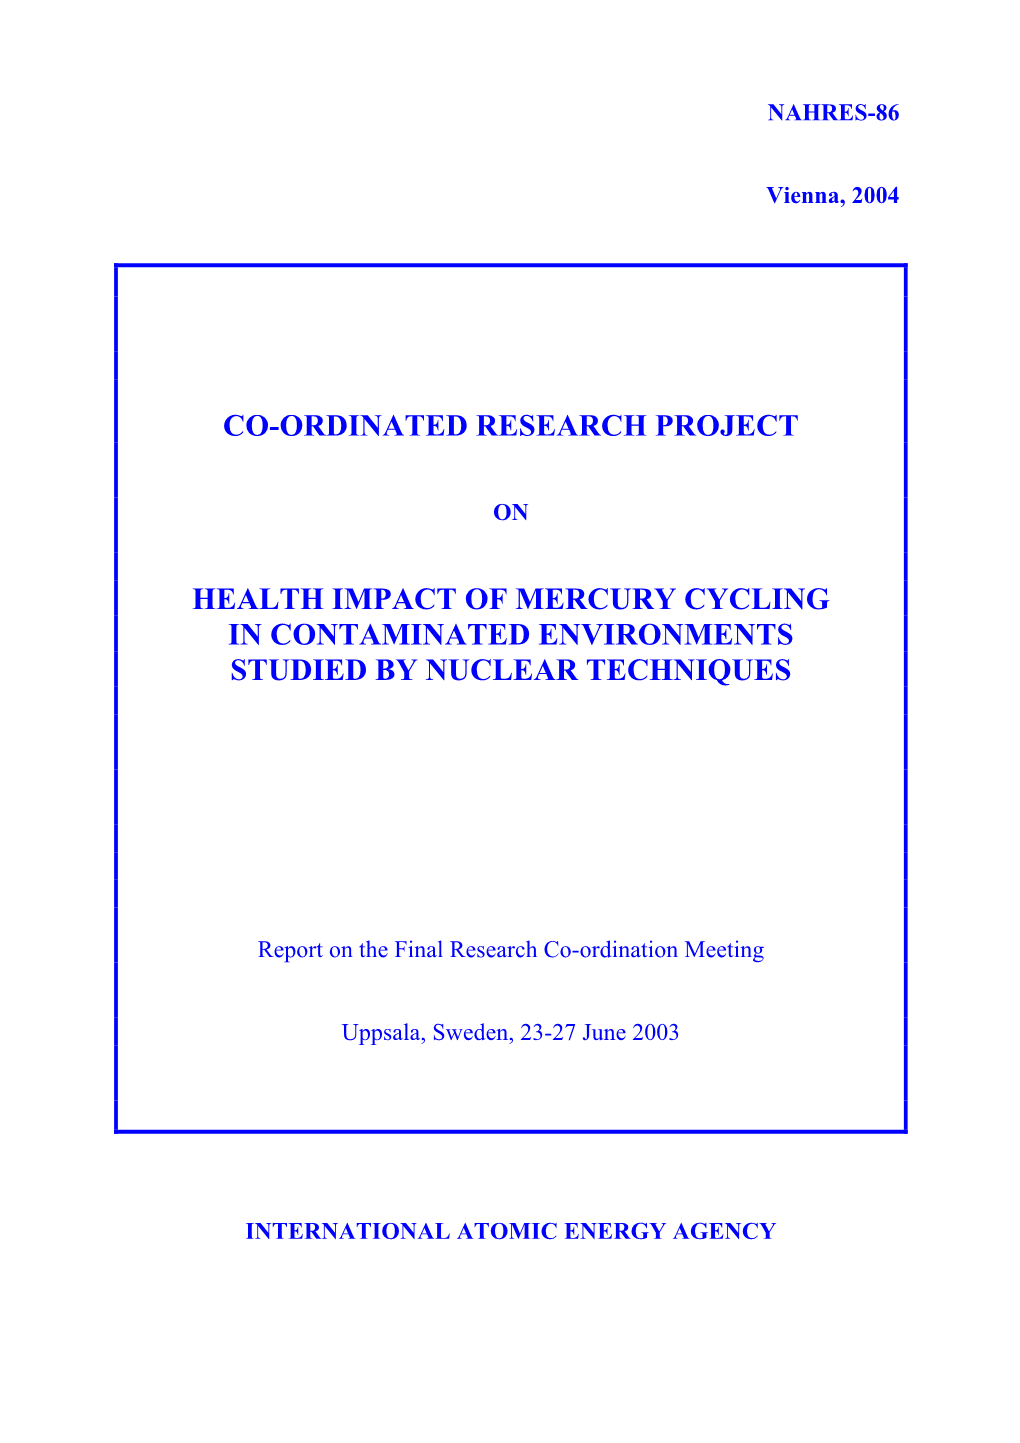 Health Impact of Mercury Cycling in Contaminated Environments Studied by Nuclear Techniques